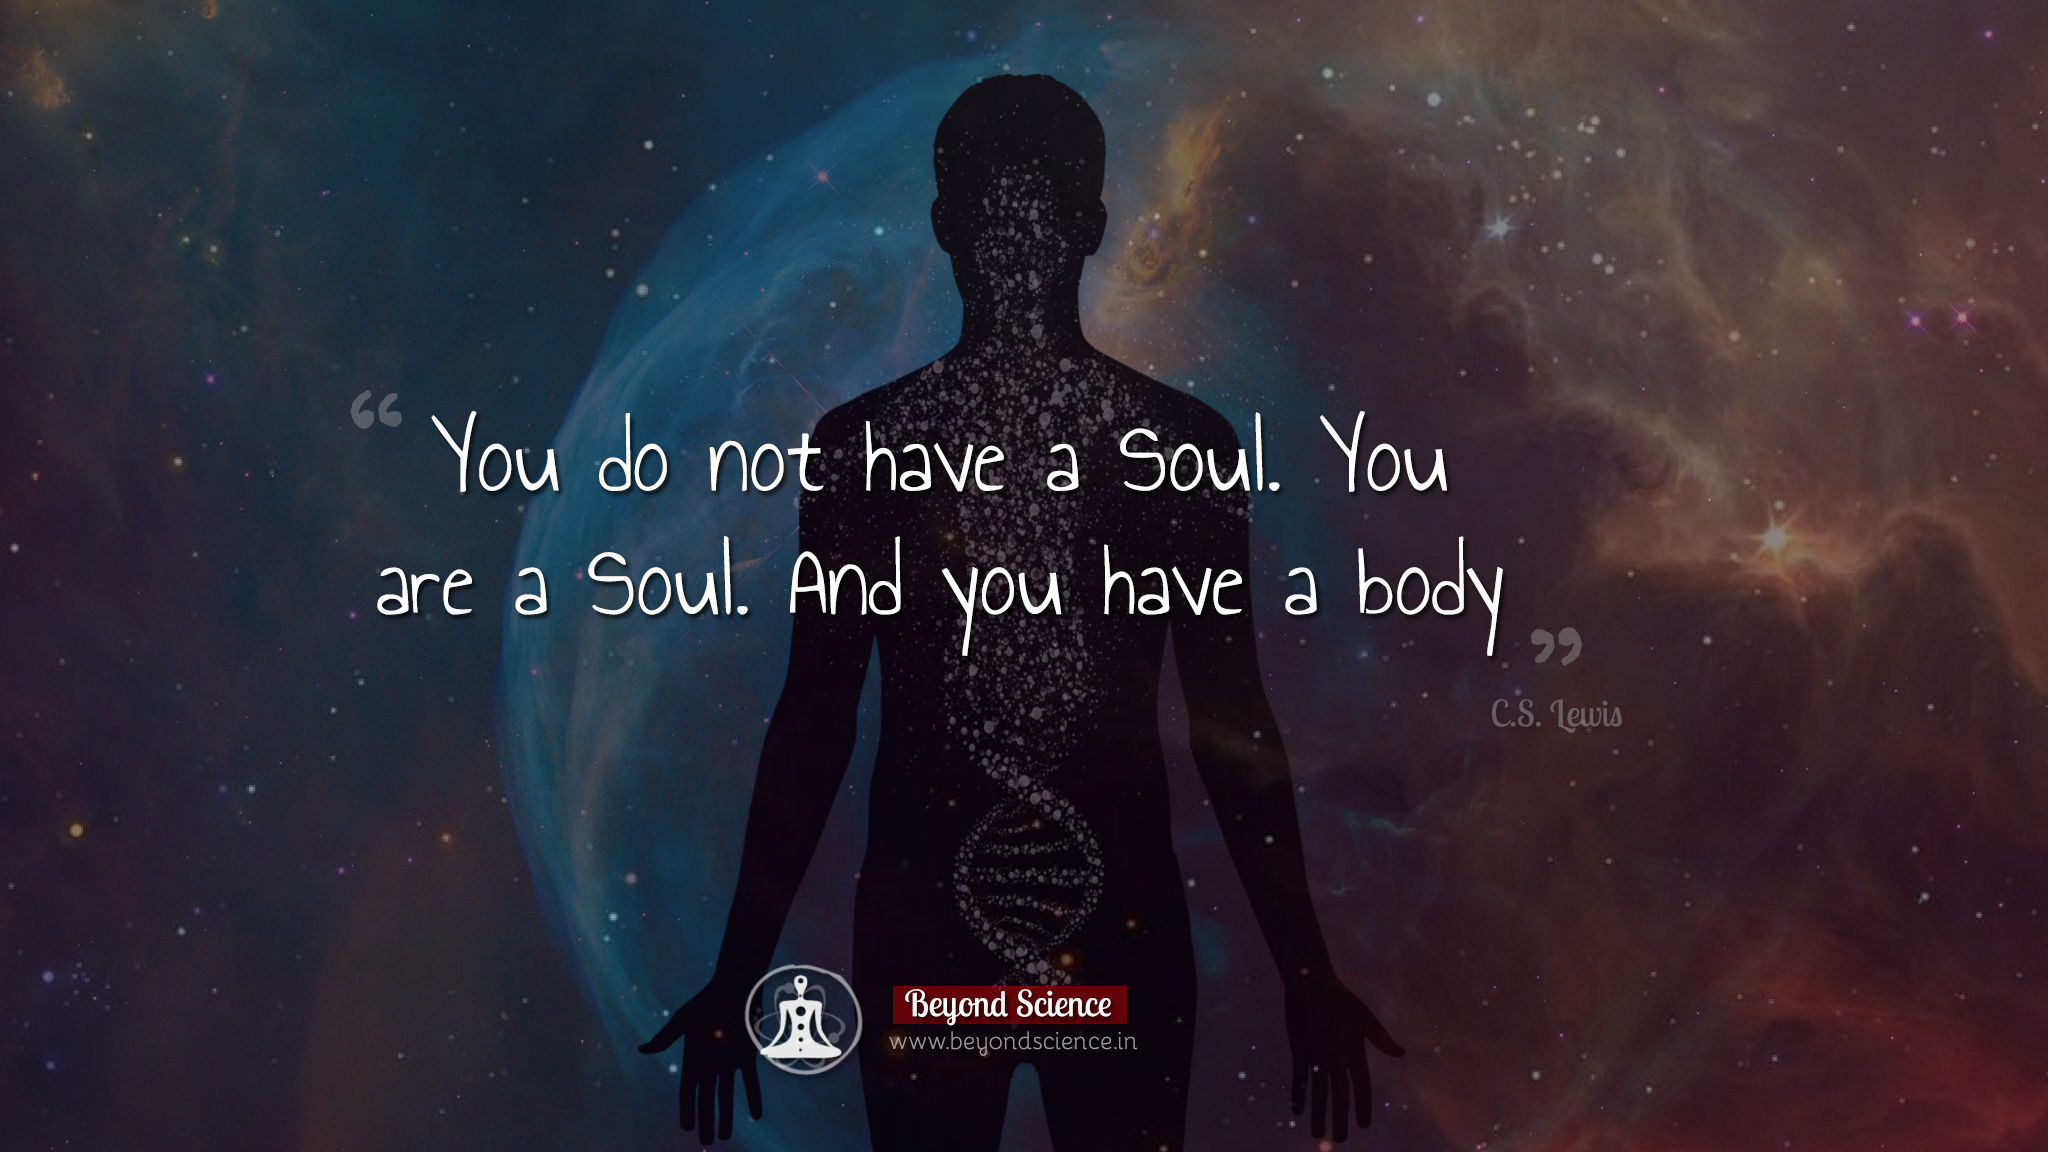 You do not have a Soul. You are a Soul. And you have a body.